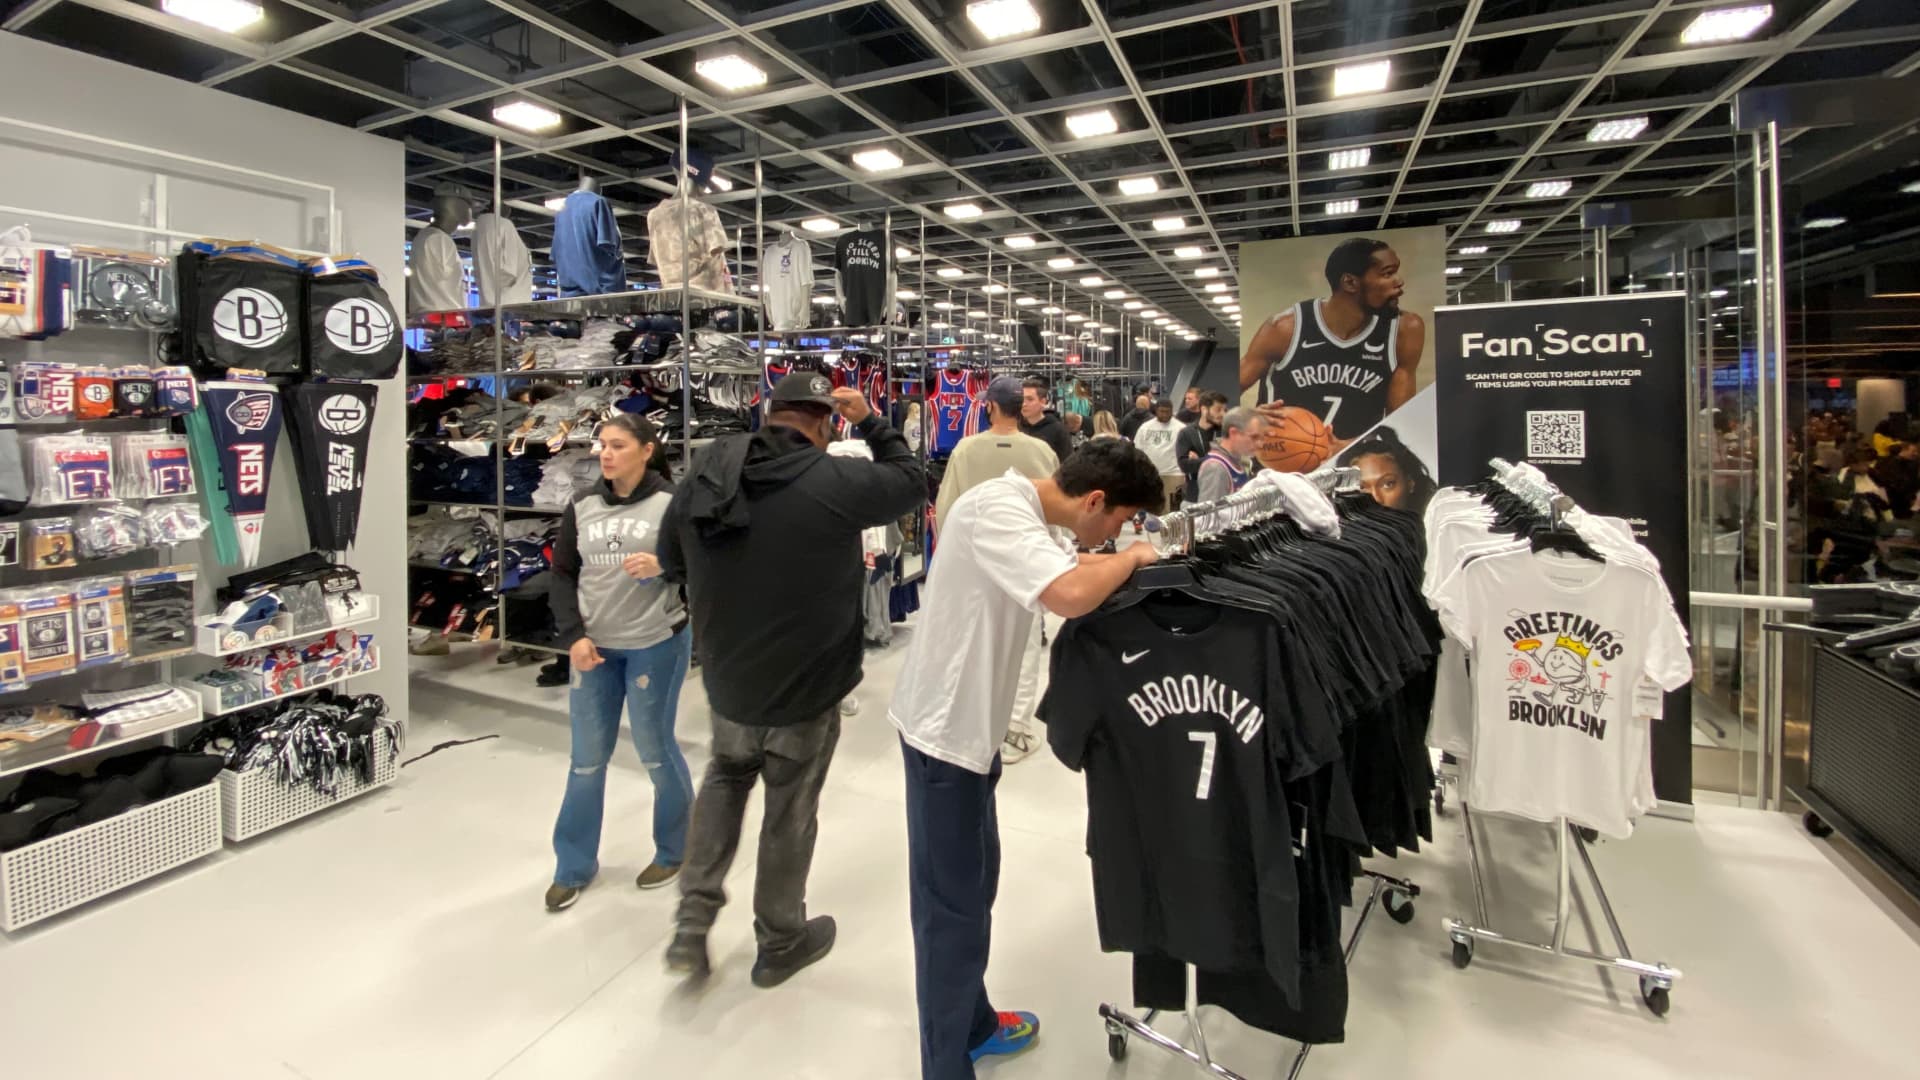 Sports fans shop at the Brooklyn Nets Fan shop at Barclays Center.